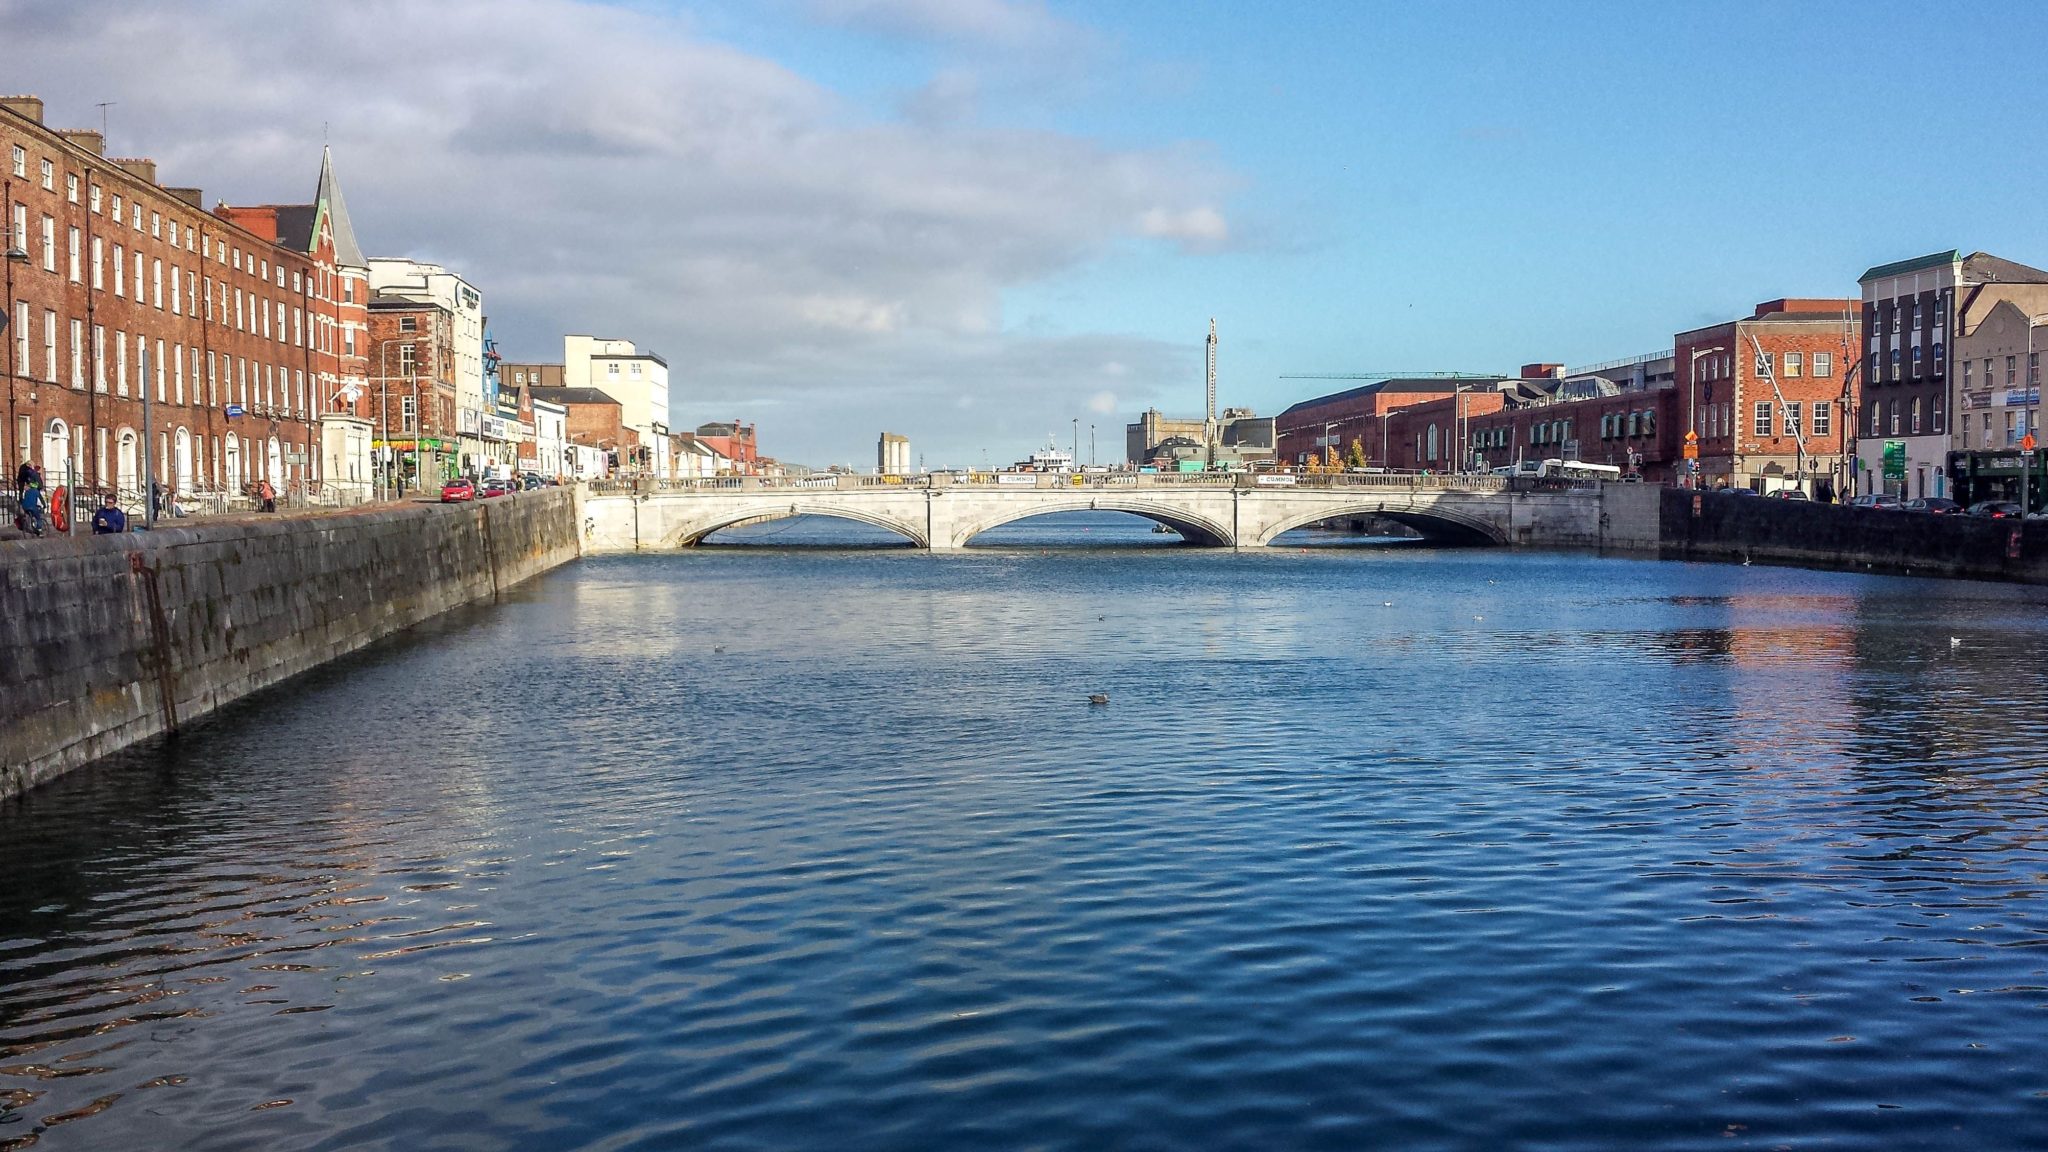 The River Lee in Cork Ireland with brick buildings on both sides and a bridge in the distance